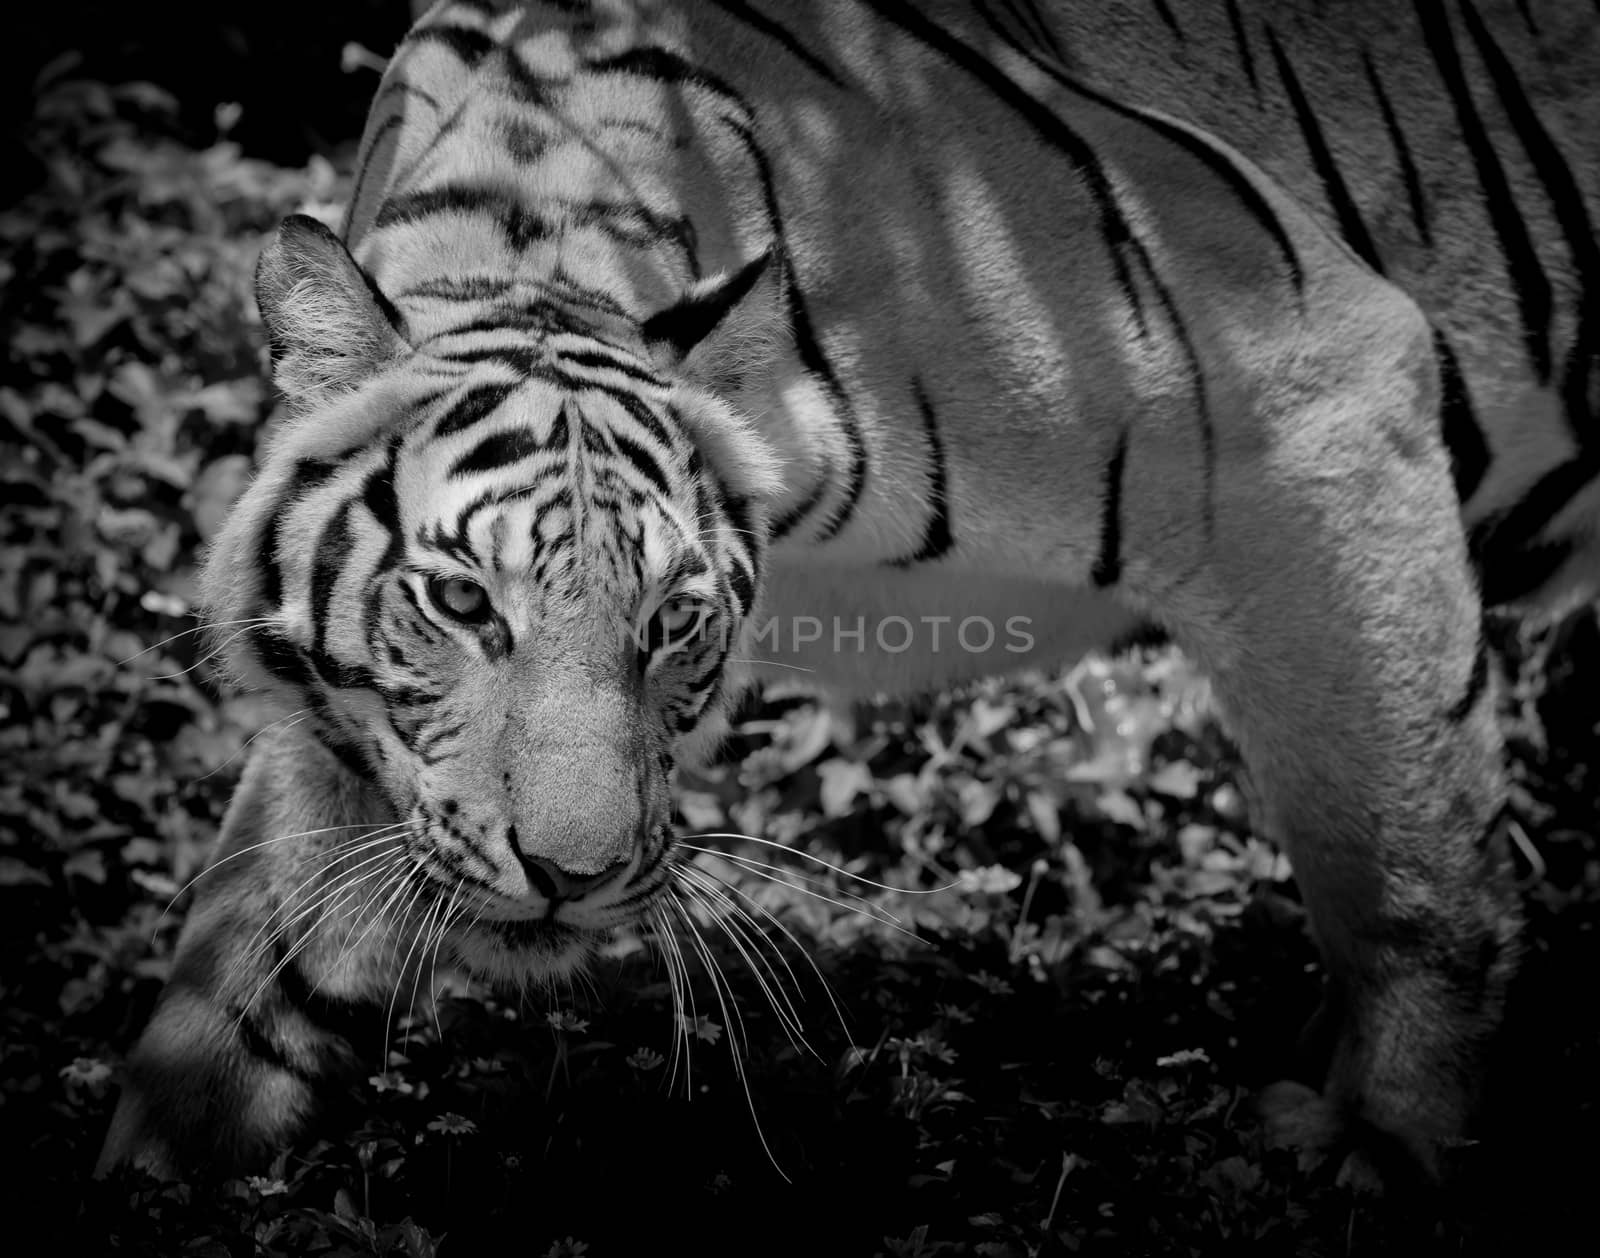 Black and White Tiger looking his prey and ready to catch it.